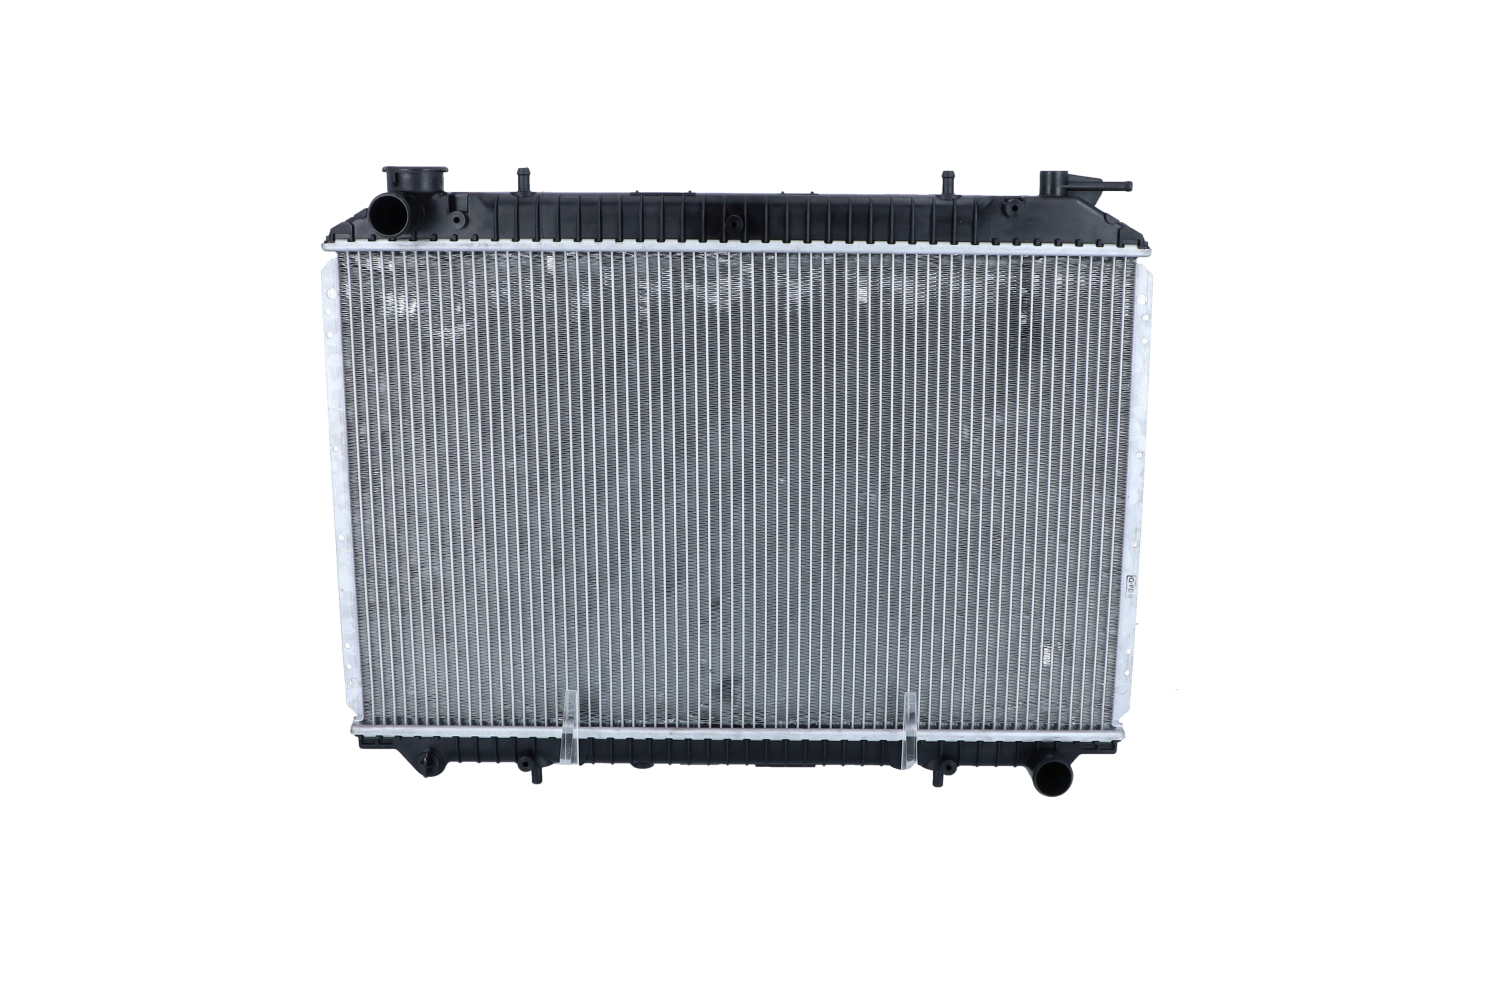 NRF Aluminium, 703 x 422 x 30 mm, with mounting parts, Brazed cooling fins Radiator 519534 buy